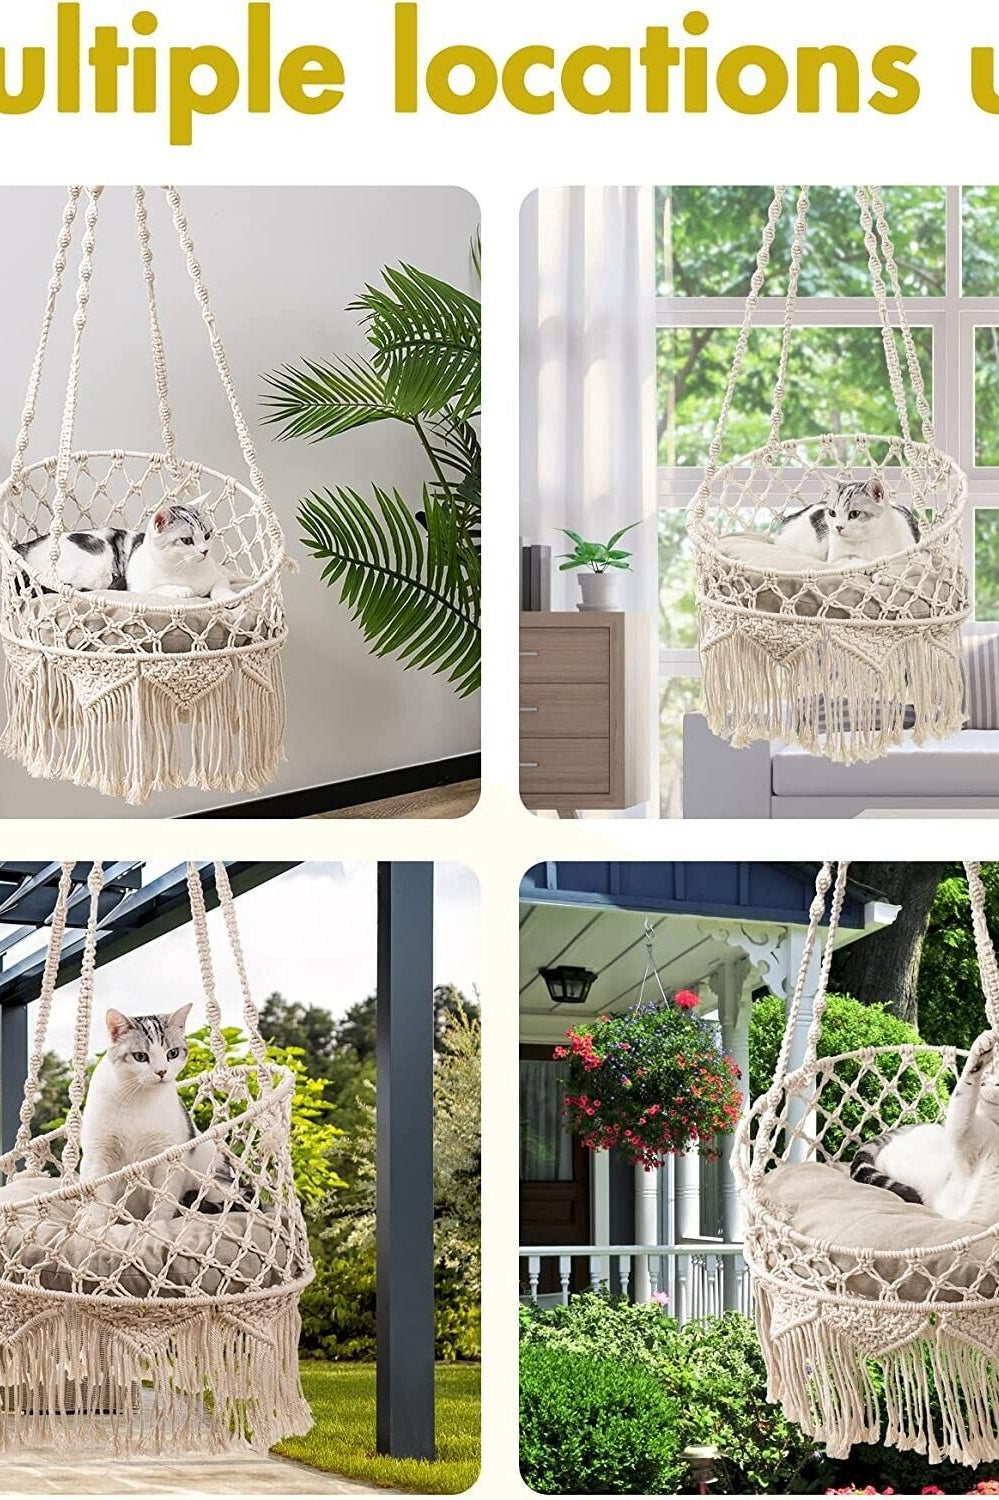 Boho Macrame Hanging Cat Hammock Bed The Groovalution